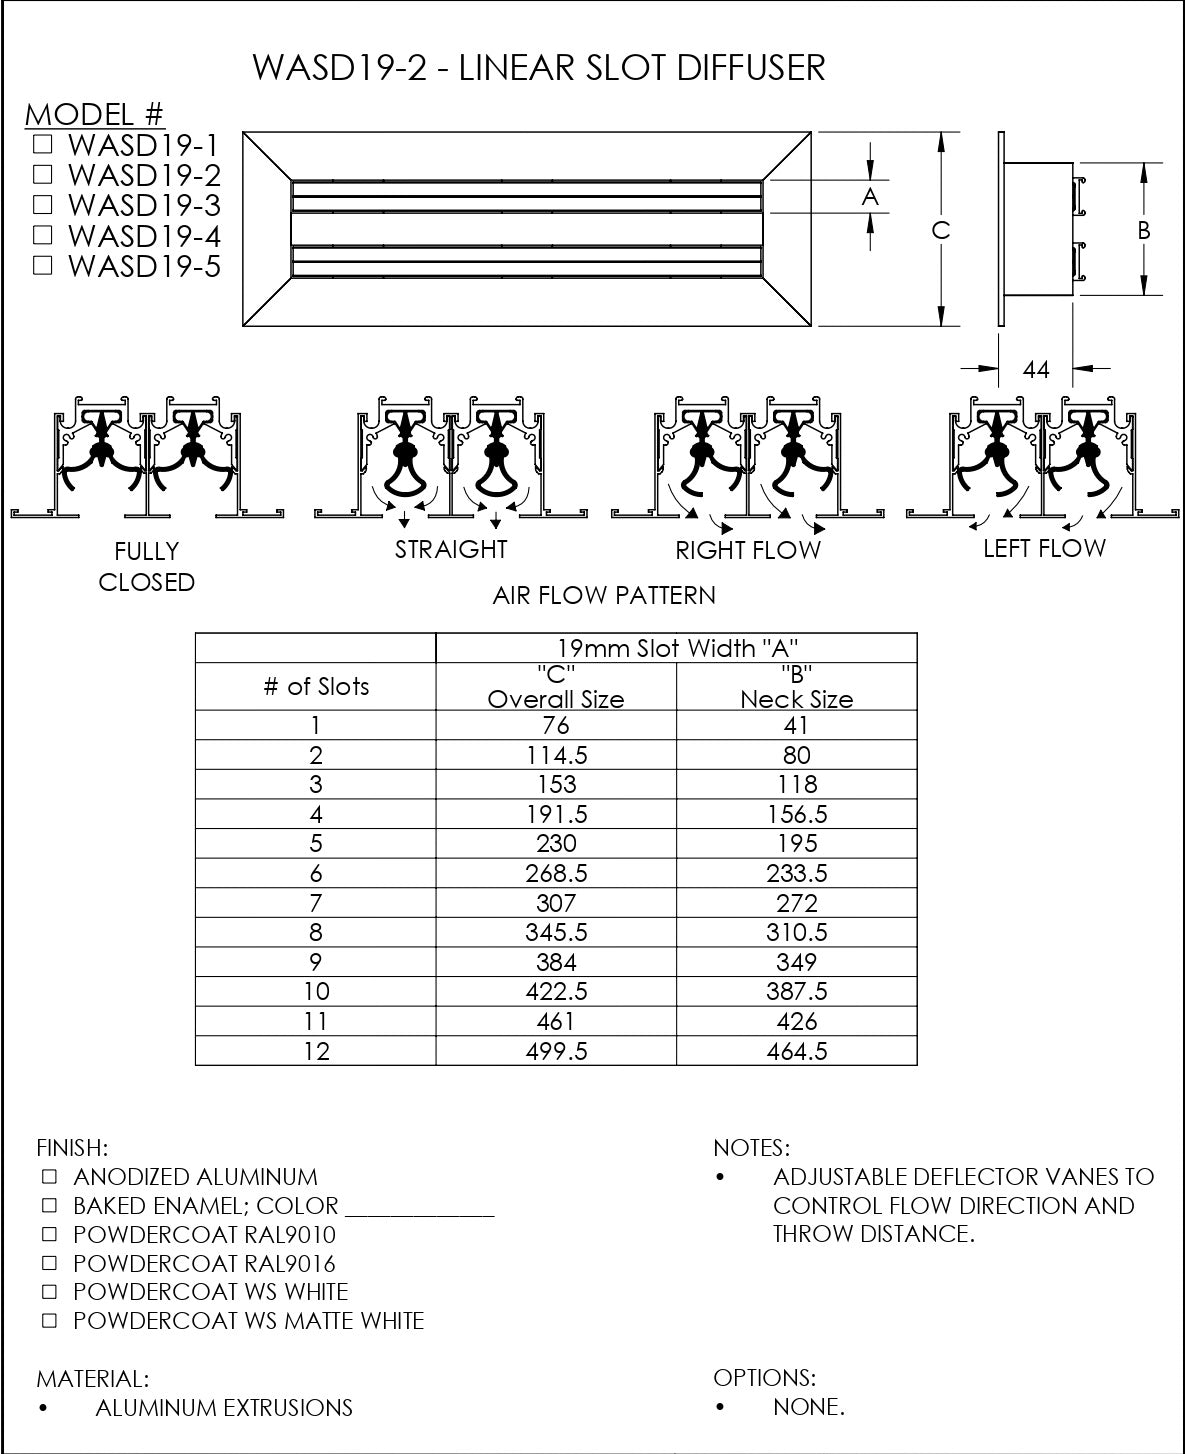 Linear slot diffusers 19-2 size chart